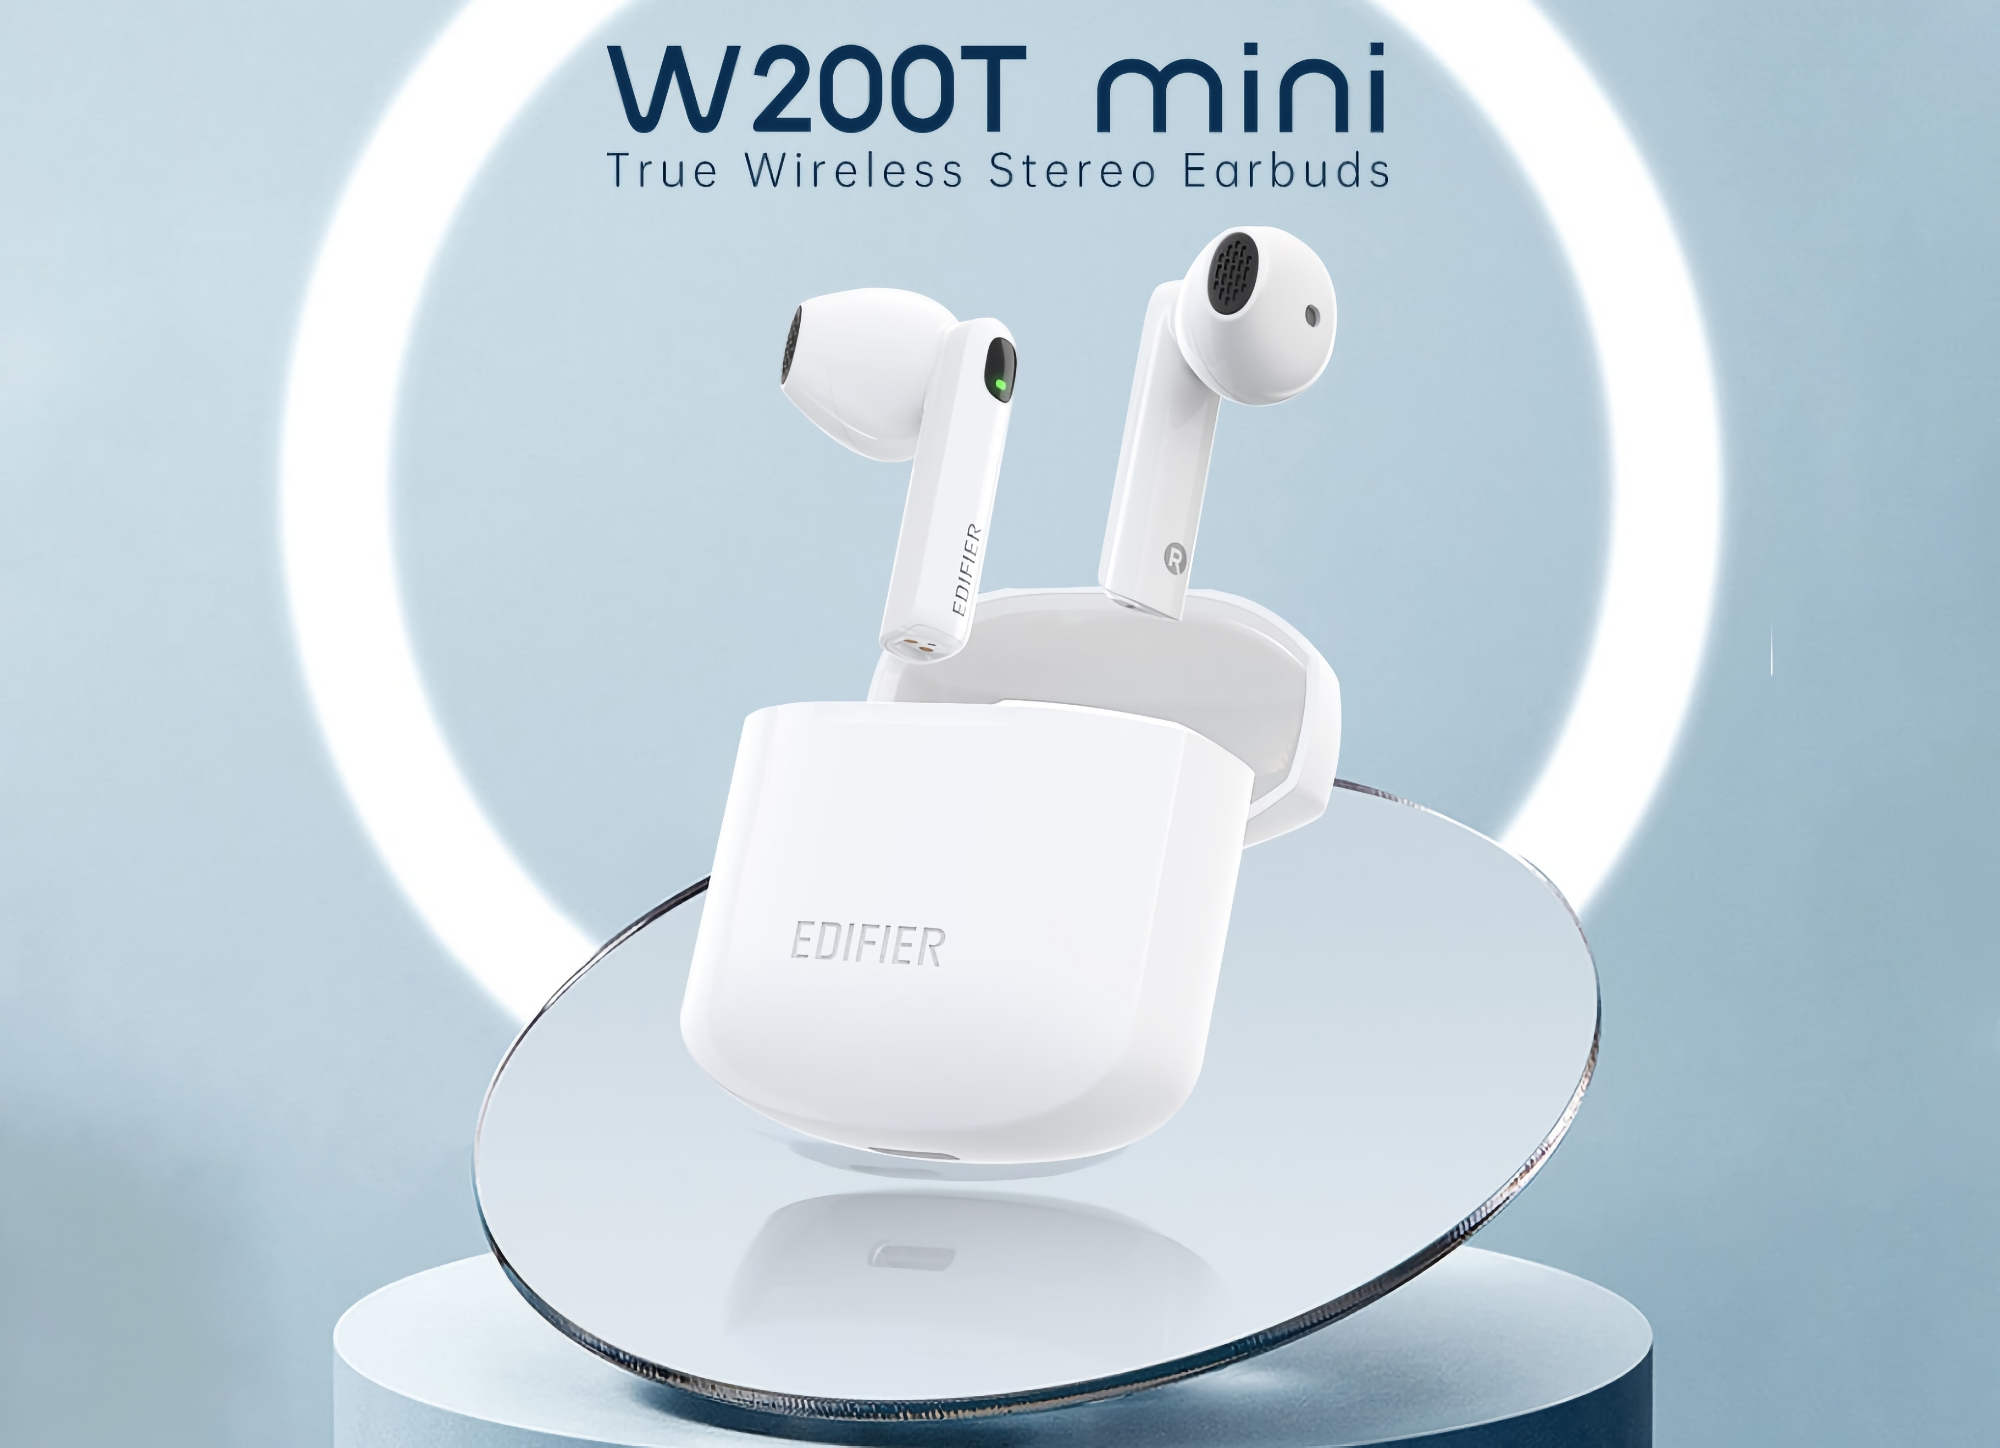 EDIFIER W200T mini: TWS headphones with IP54 protection, aptX support and autonomy up to 22 hours for $26